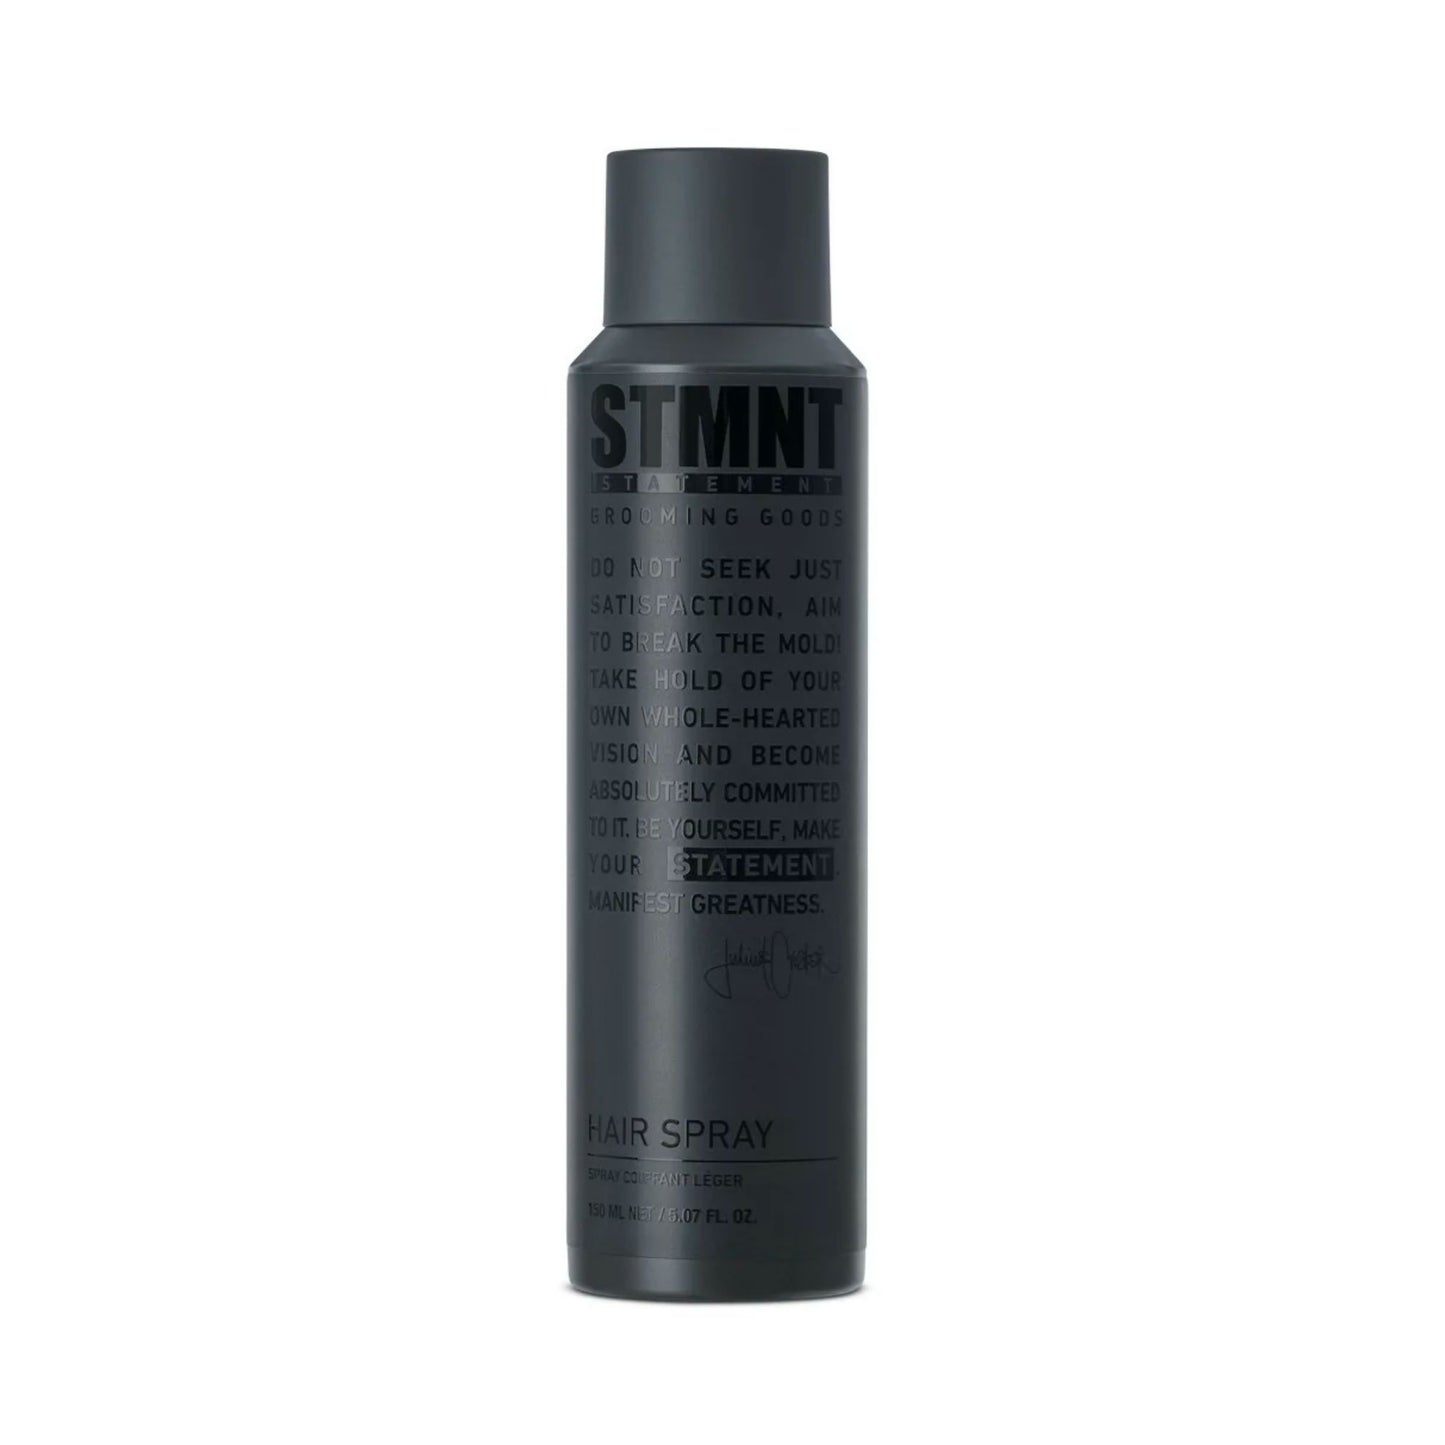 Hair Spray - Fixing lacquer - Light hold - 150ml